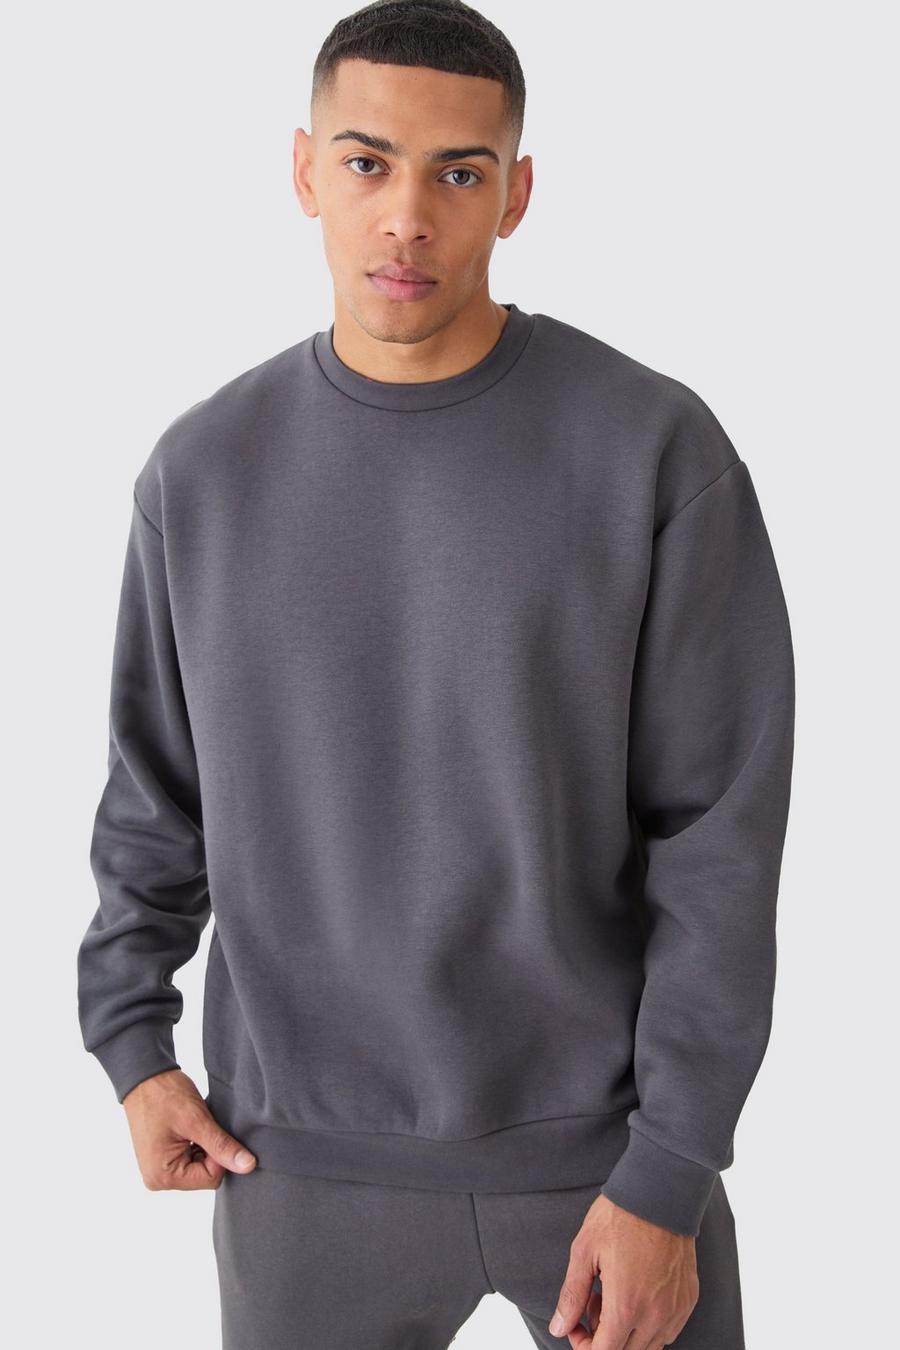 Charcoal Oversized Crew Neck Fitch